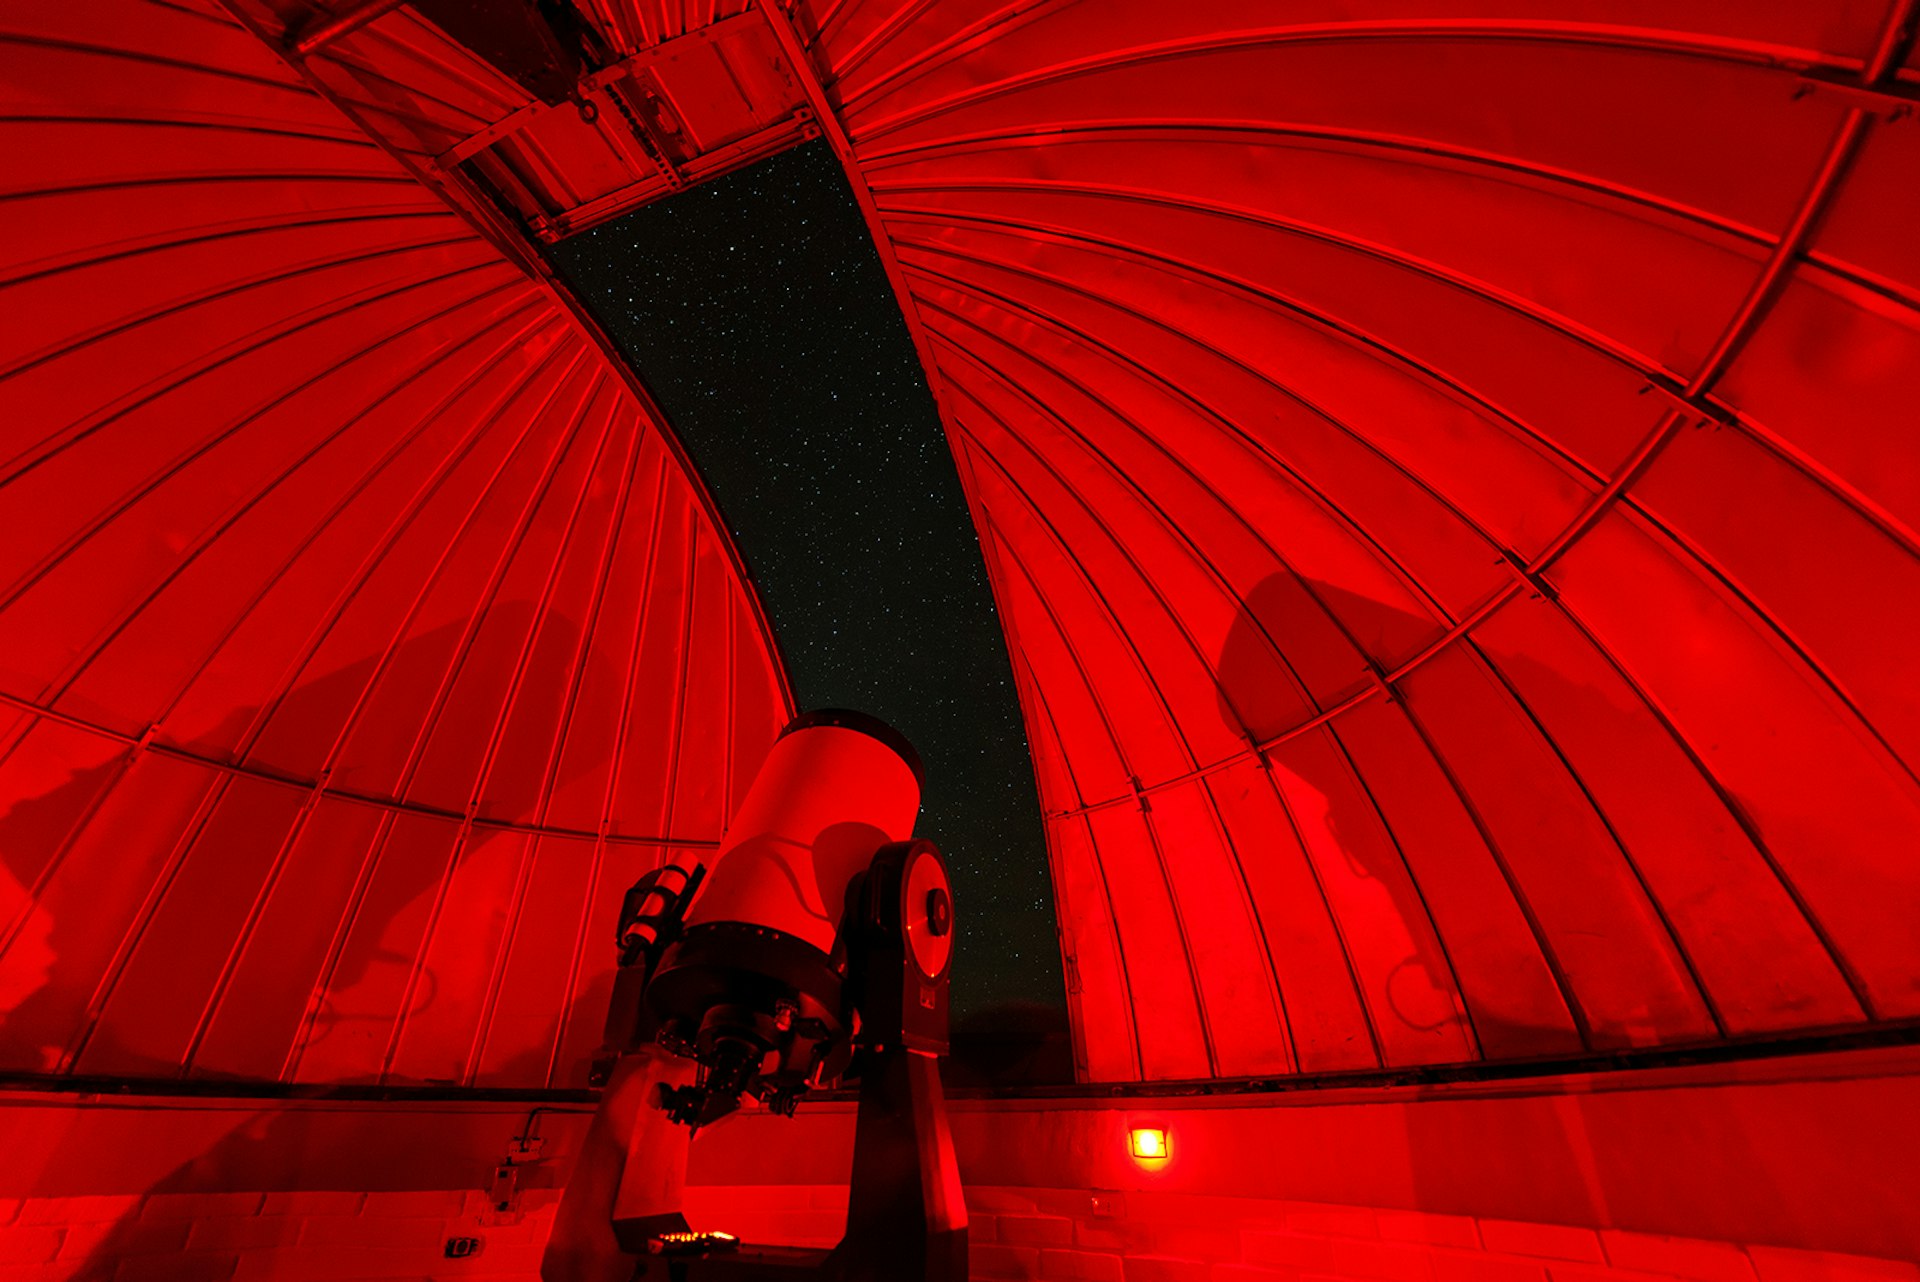 A view of the inside of an observatory dome, lit with a red light © DC_Colombia / Getty Images